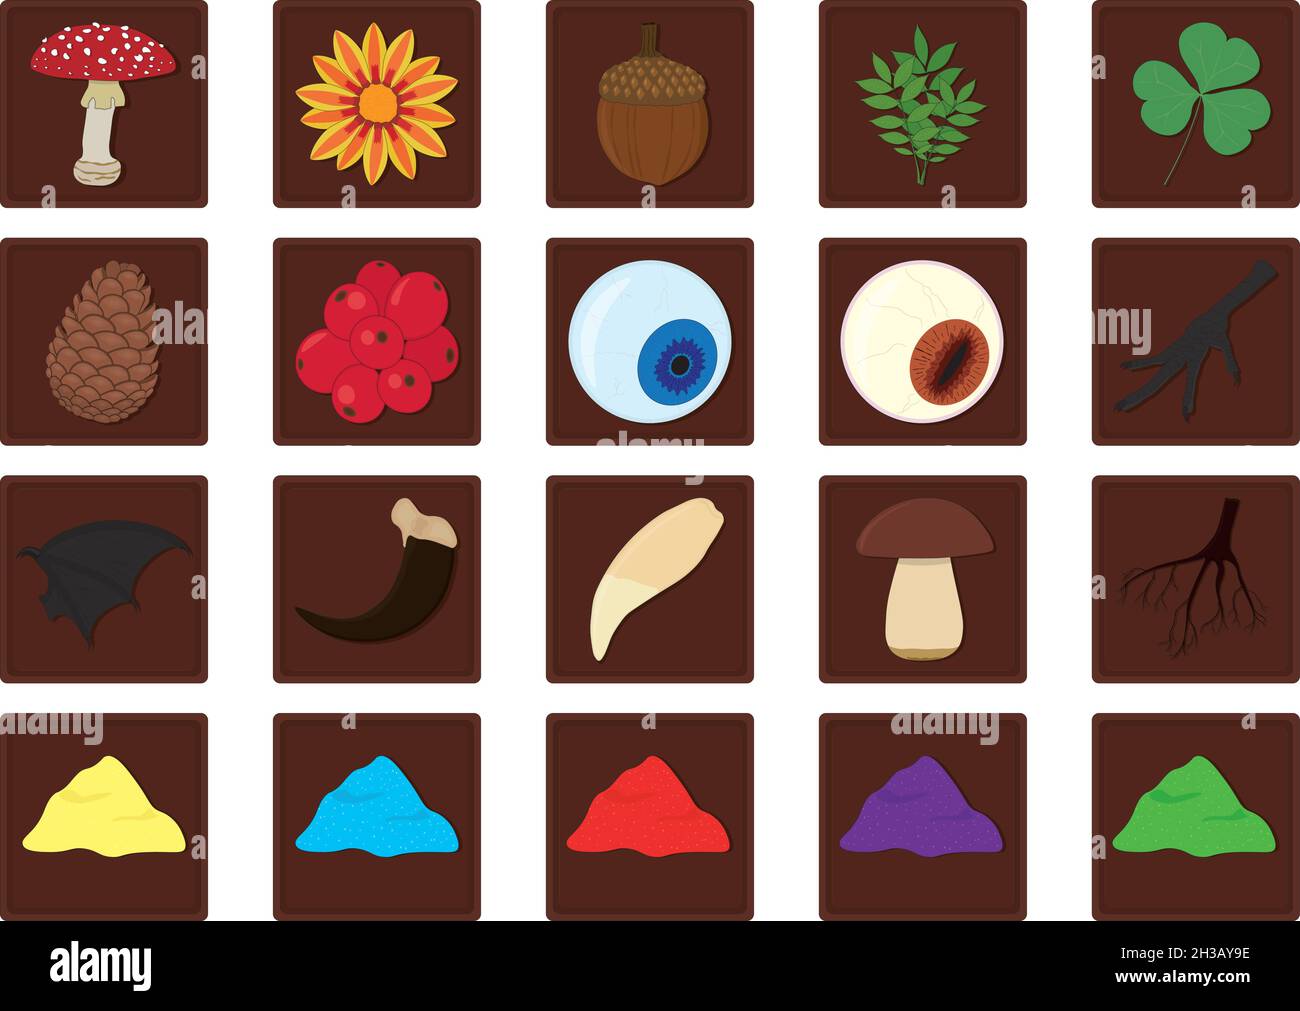 Alchemy ingredients collection game assets vector illustration Stock Vector